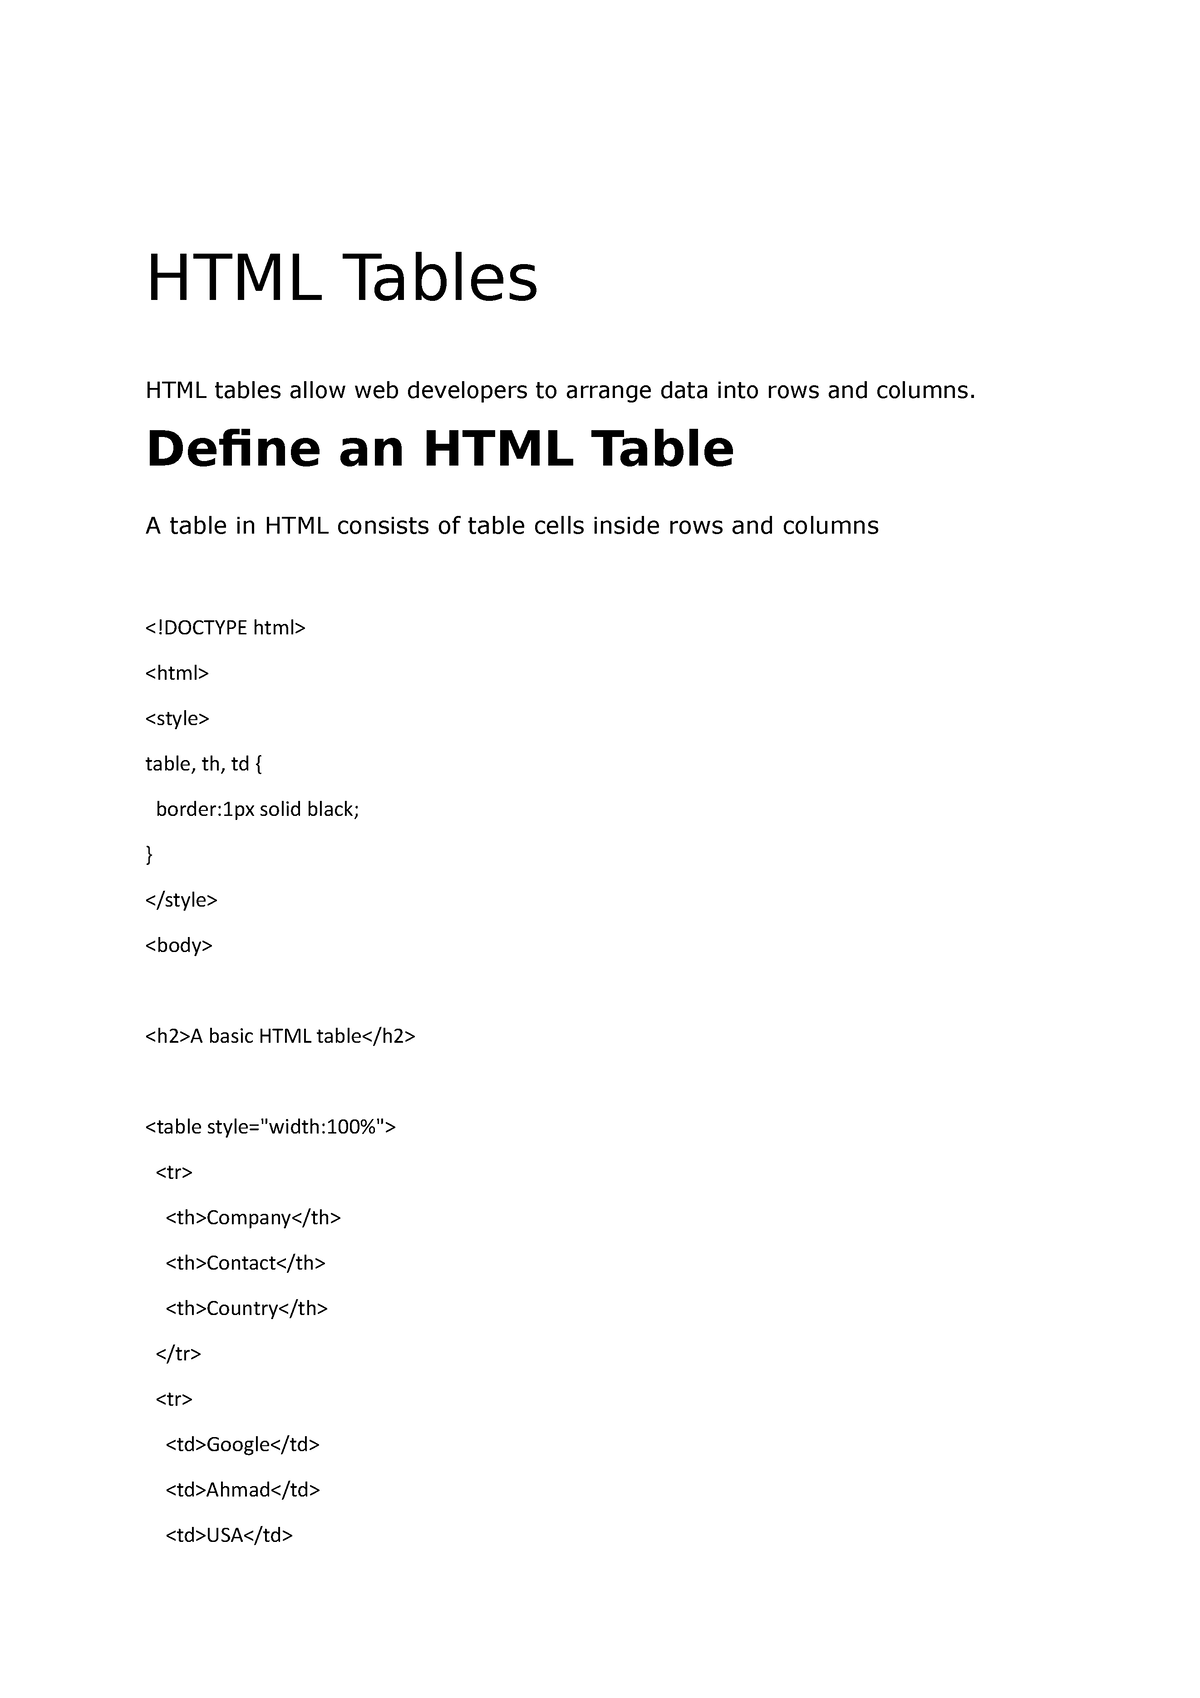 Wrinkles Salesperson editorial HTML Part2 table - HTML Tables HTML tables allow web developers to arrange  data into rows and - StuDocu